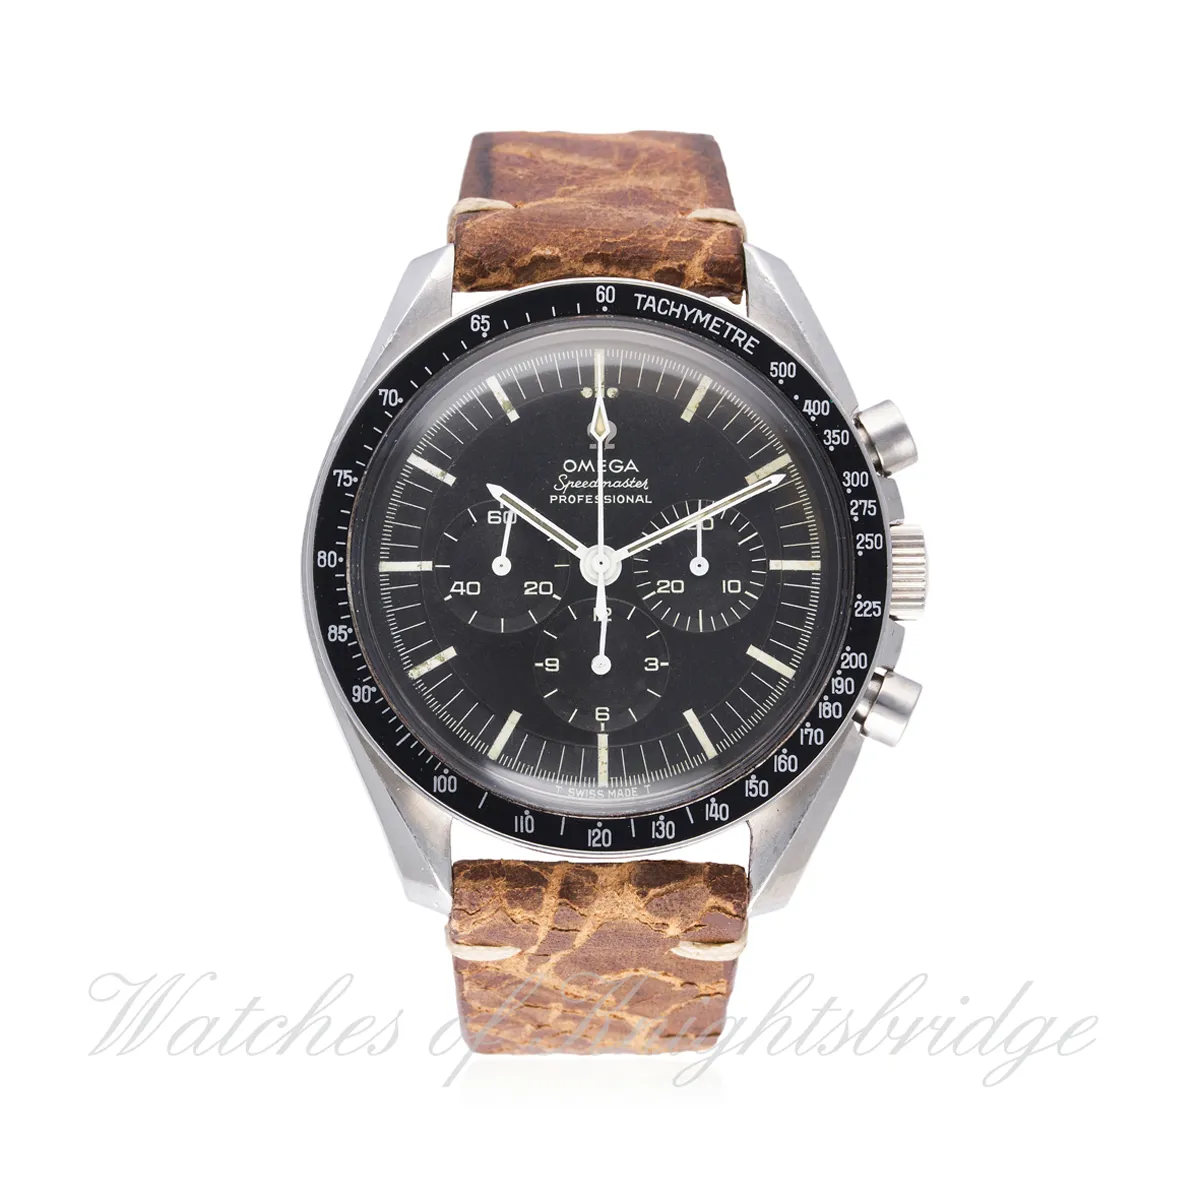 Omega Speedmaster Professional Moonwatch Moonphase 145.012-67 42mm Stainless steel Black